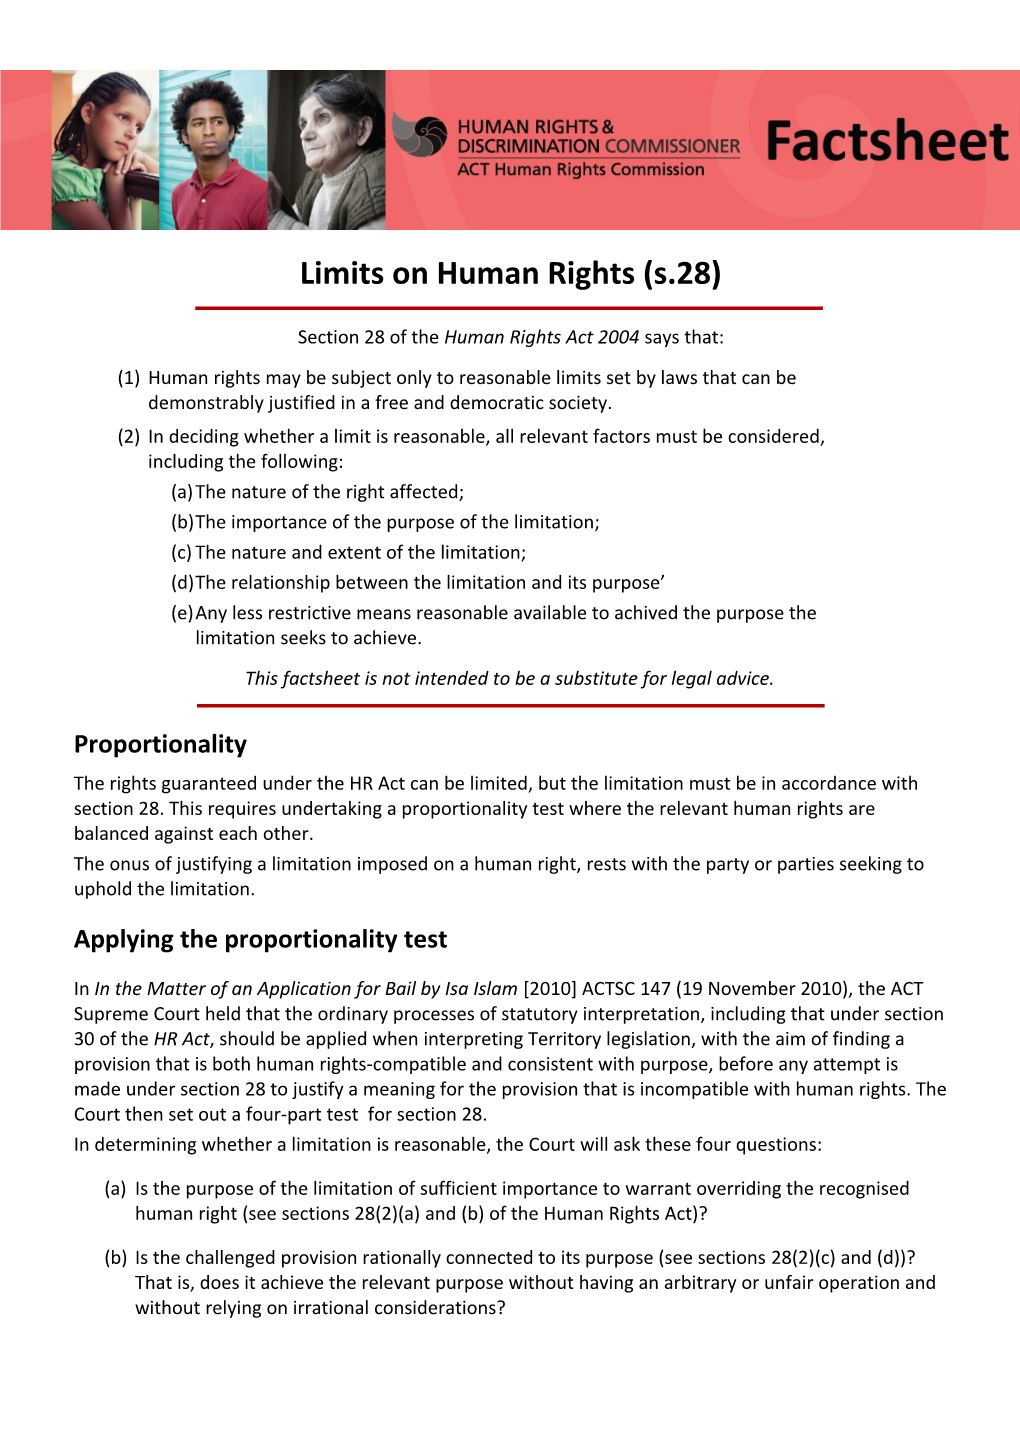 Section 28 of the Human Rights Act 2004 Says That